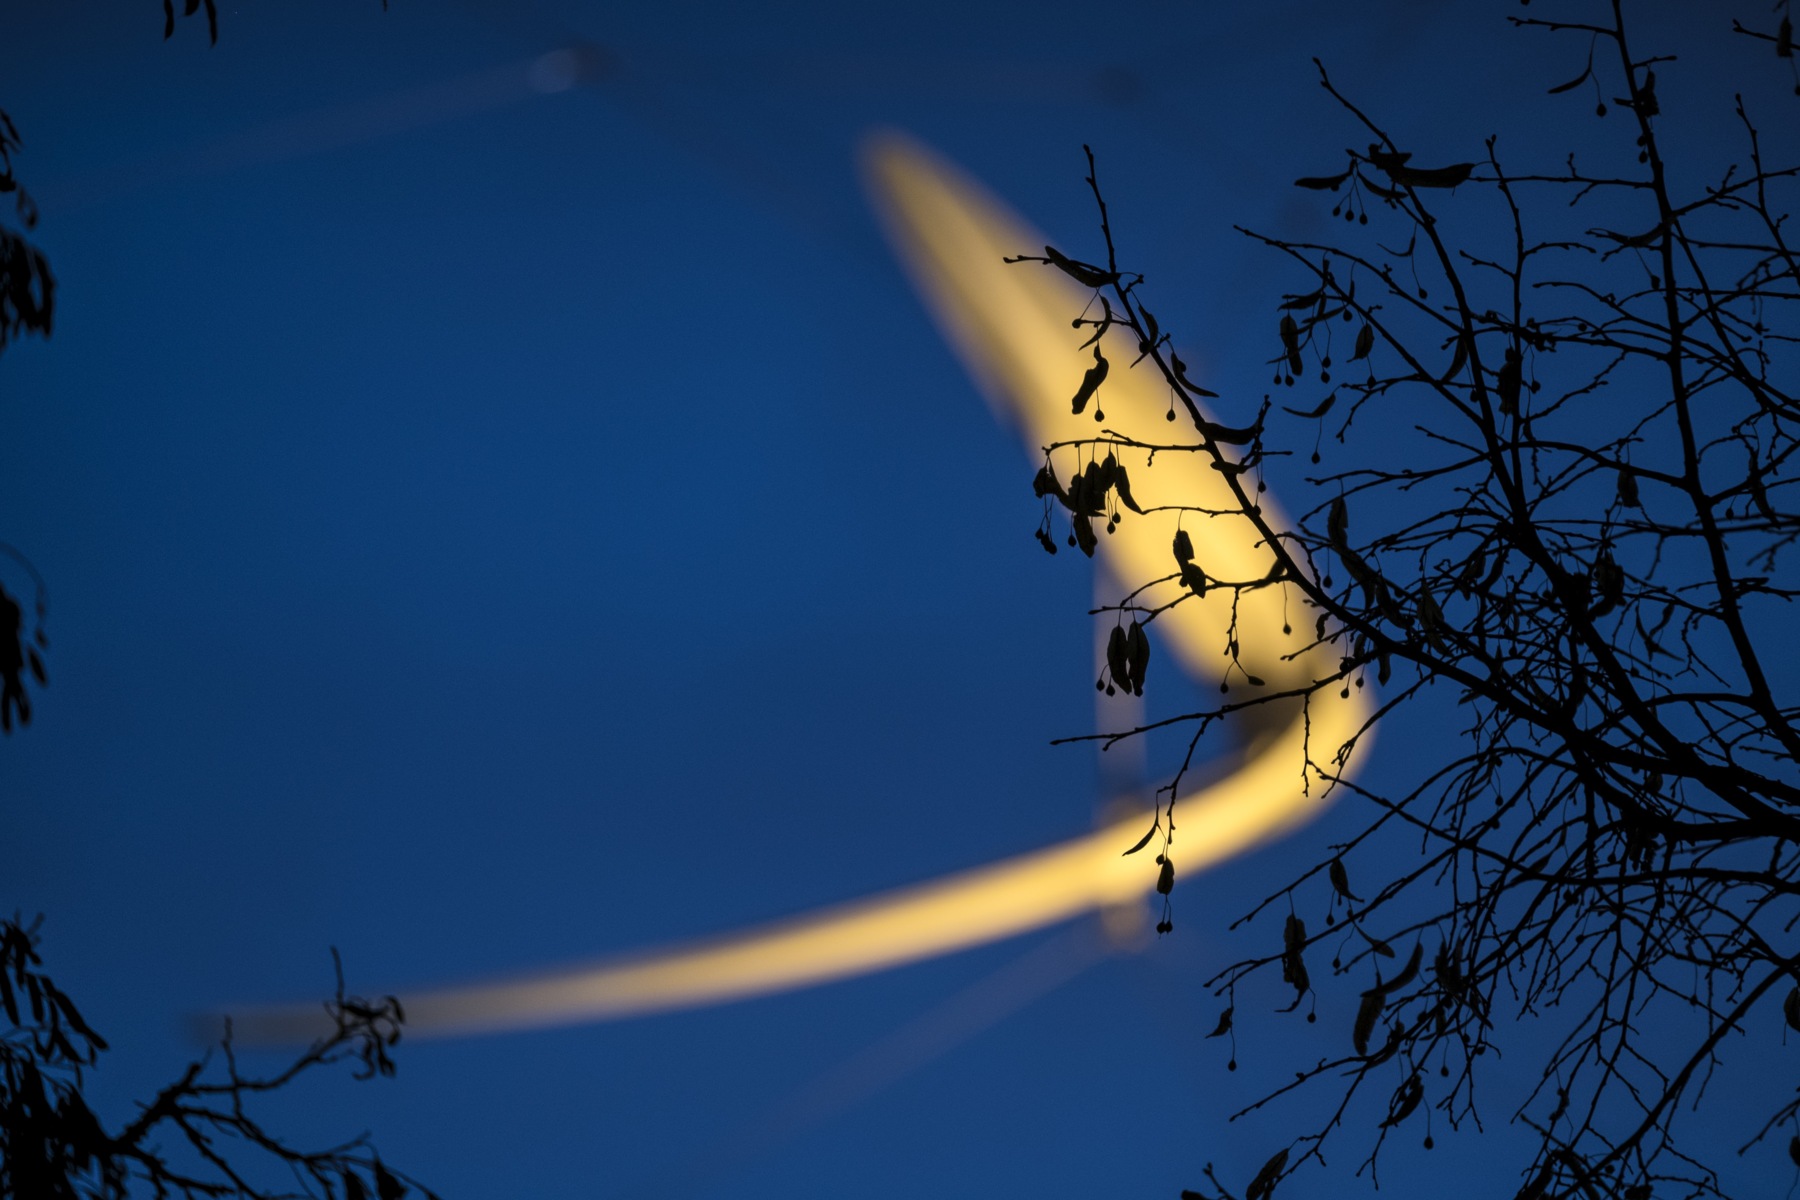 Blurred close-up of the sculpture "Healing the Earth" illuminated against the night sky on LTH's Lund campus. Photo